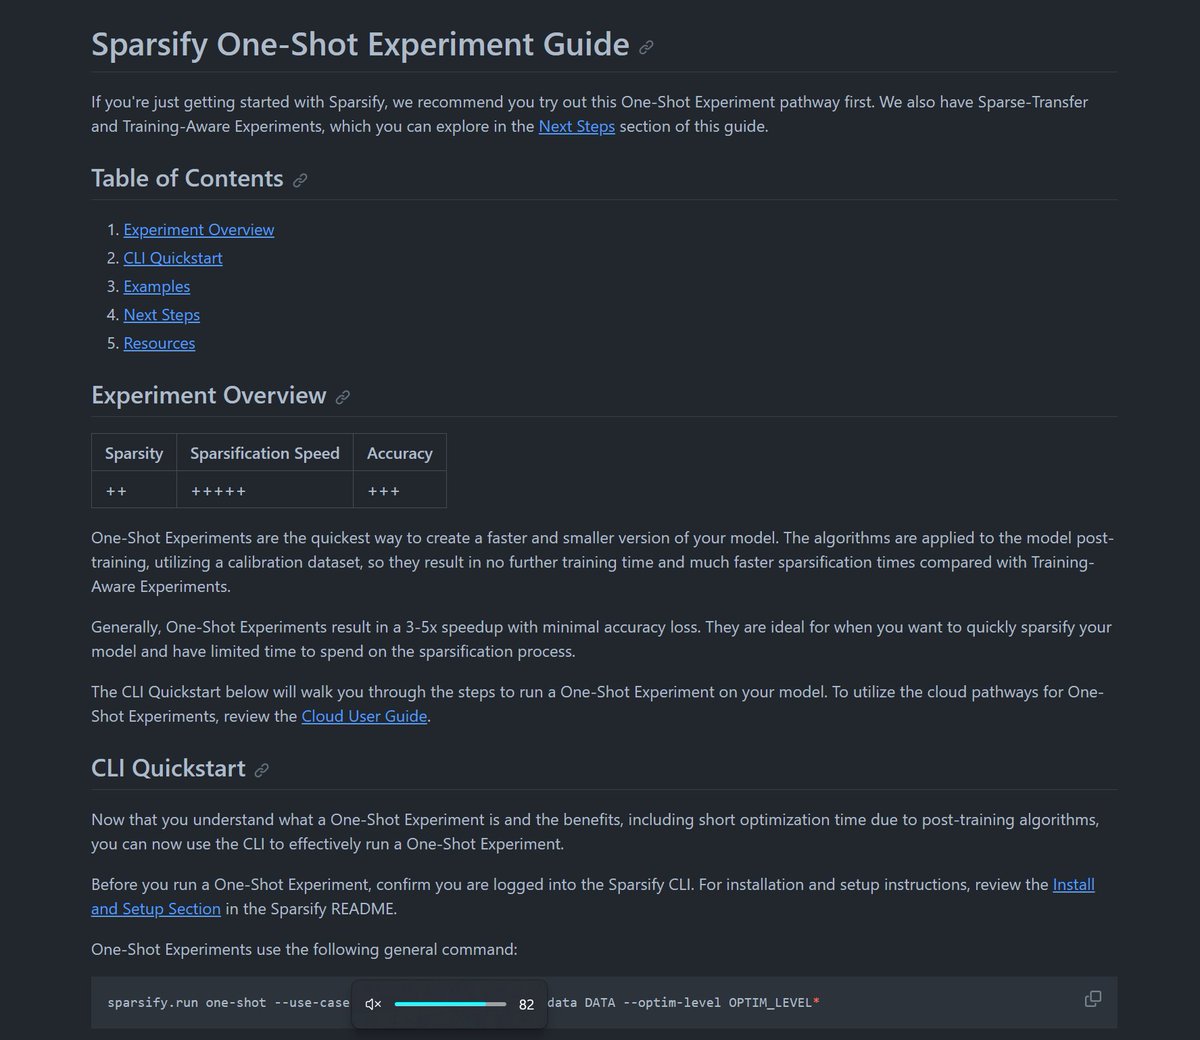 🚀🚀 Explore Sparsify's One-Shot Experiment Guide! Discover how to quickly optimize your models with post-training algorithms for a 3-5x speedup. Perfect for when you need to sparsify your model with limited time and improved inference speedups.🔥 **FYI, this is what I used to…